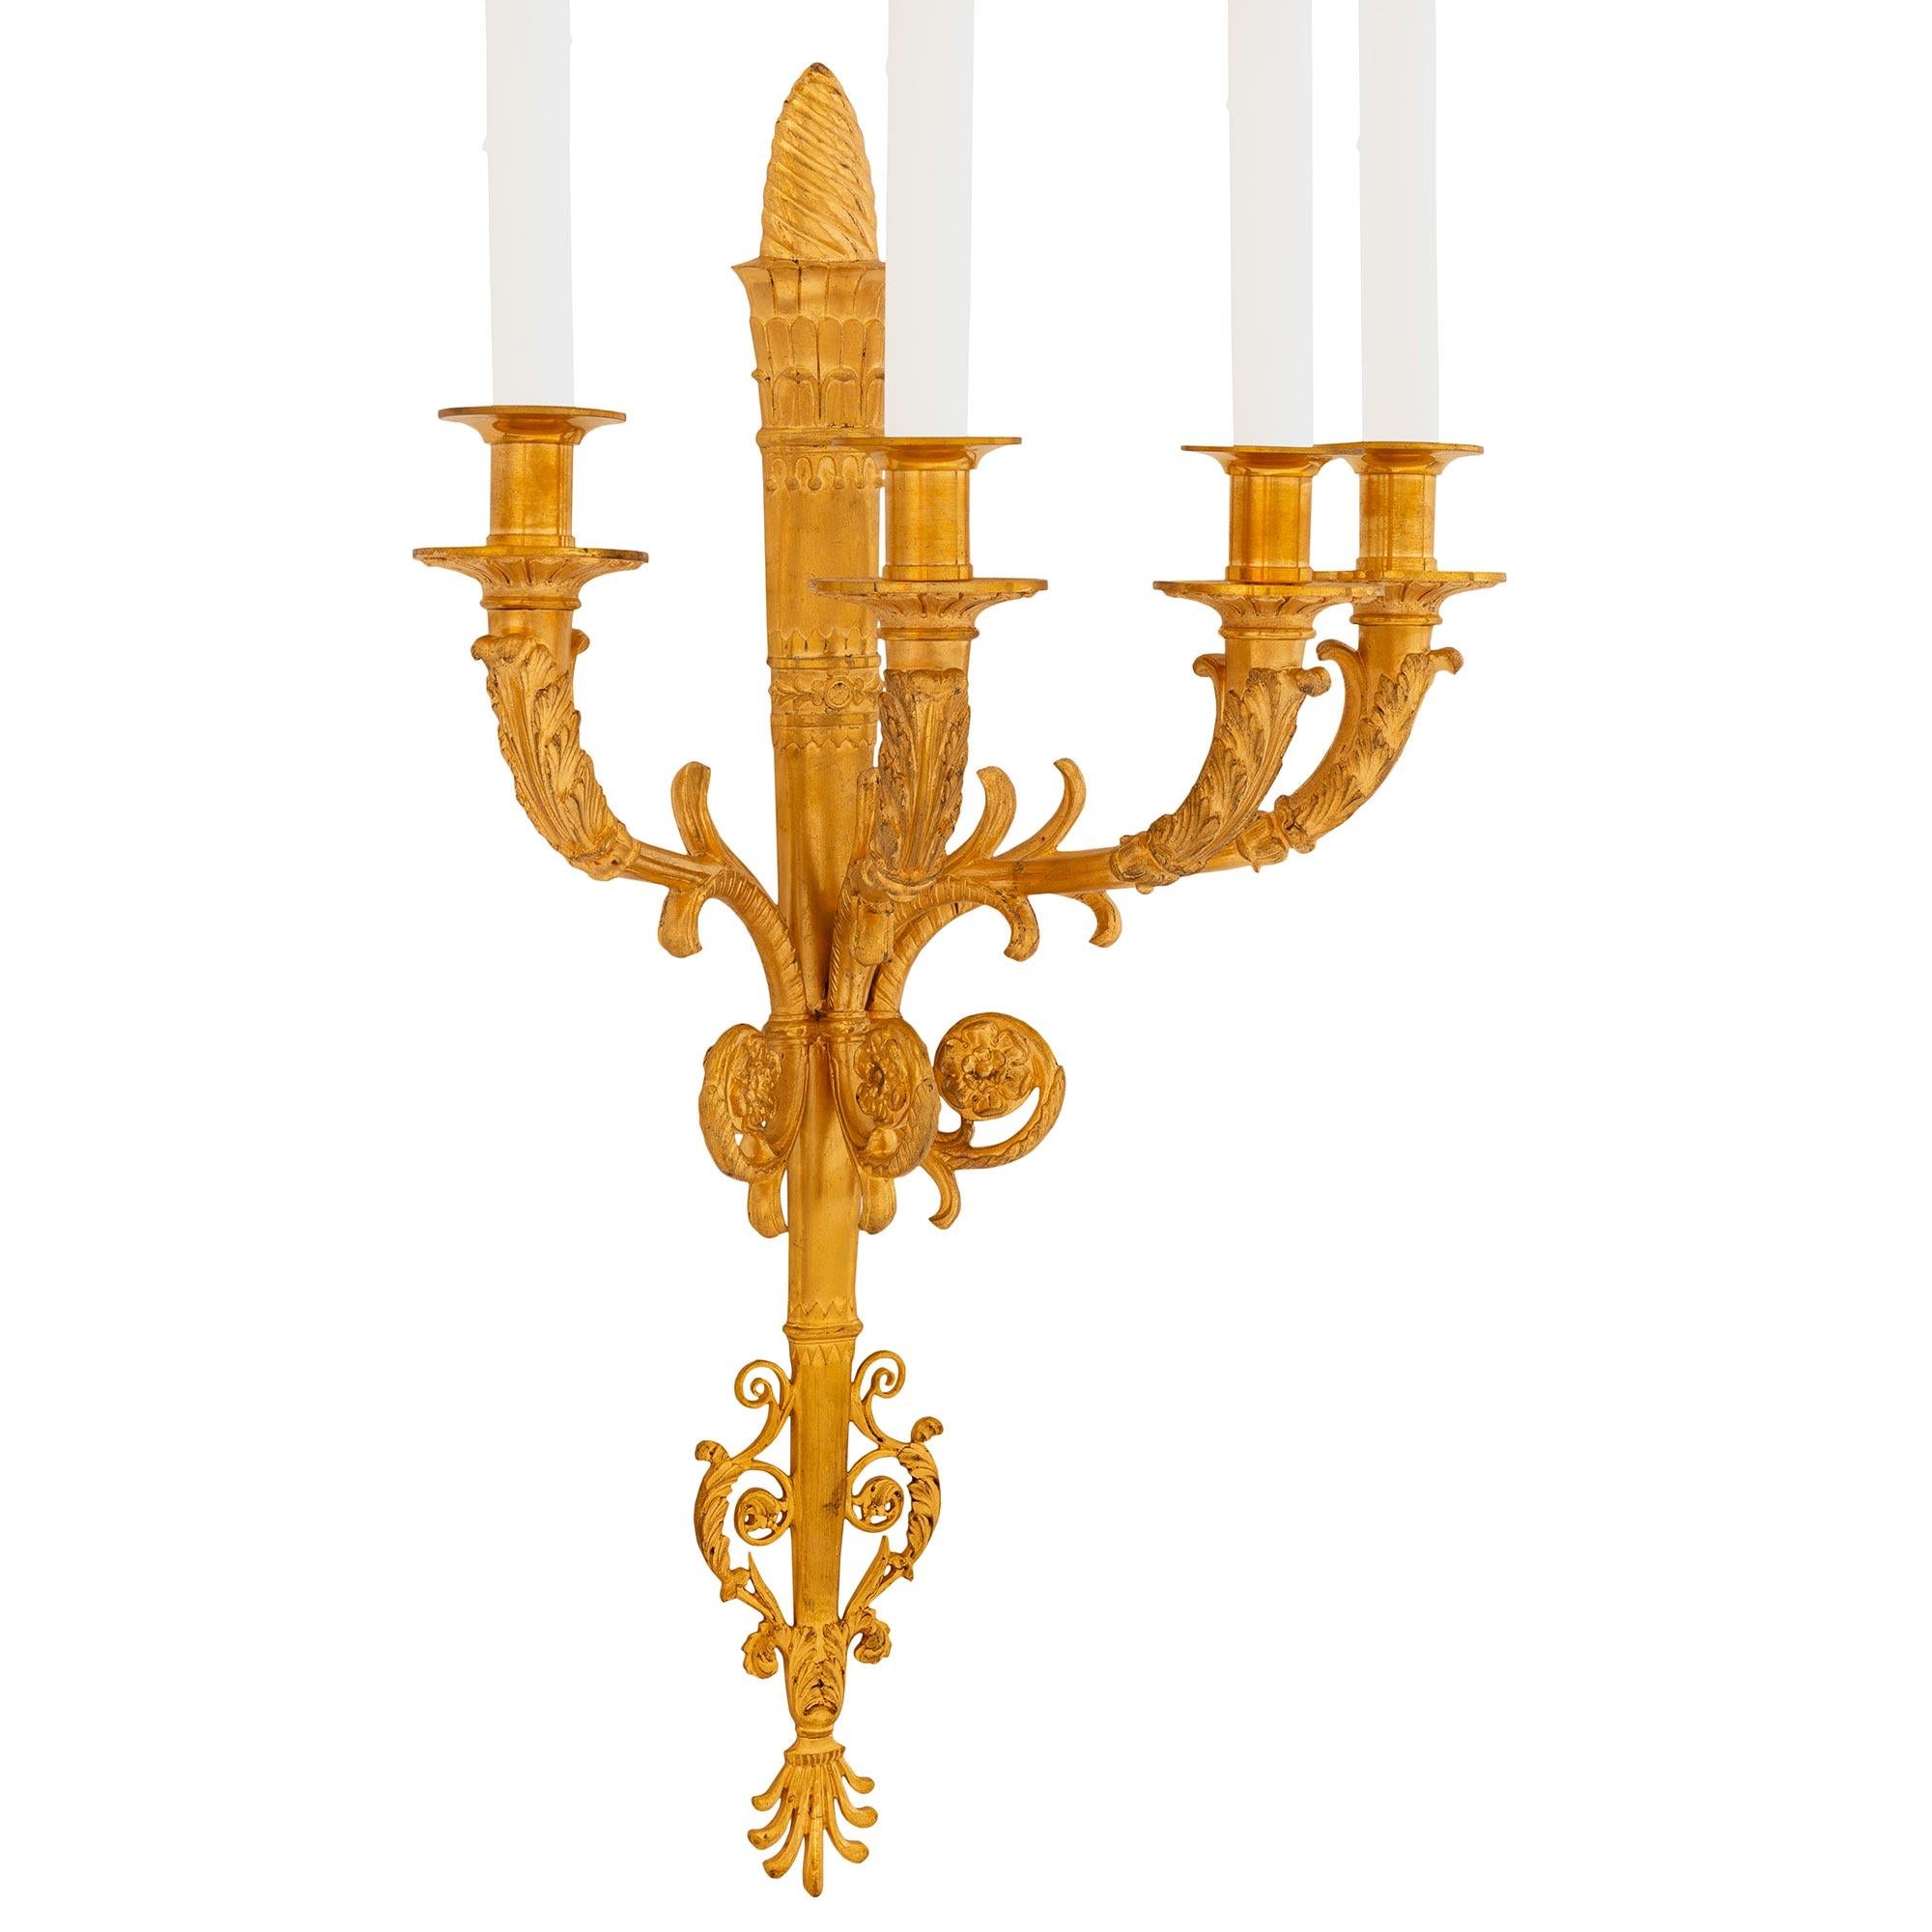 An elegant pair of French 19th century Neo-Classical st. four arm ormolu sconces. Each sconce is centered by a fine bottom palmette designed finial below most decorative scrolled foliate and Rinceau foliate designs. The tapered central fut is in the